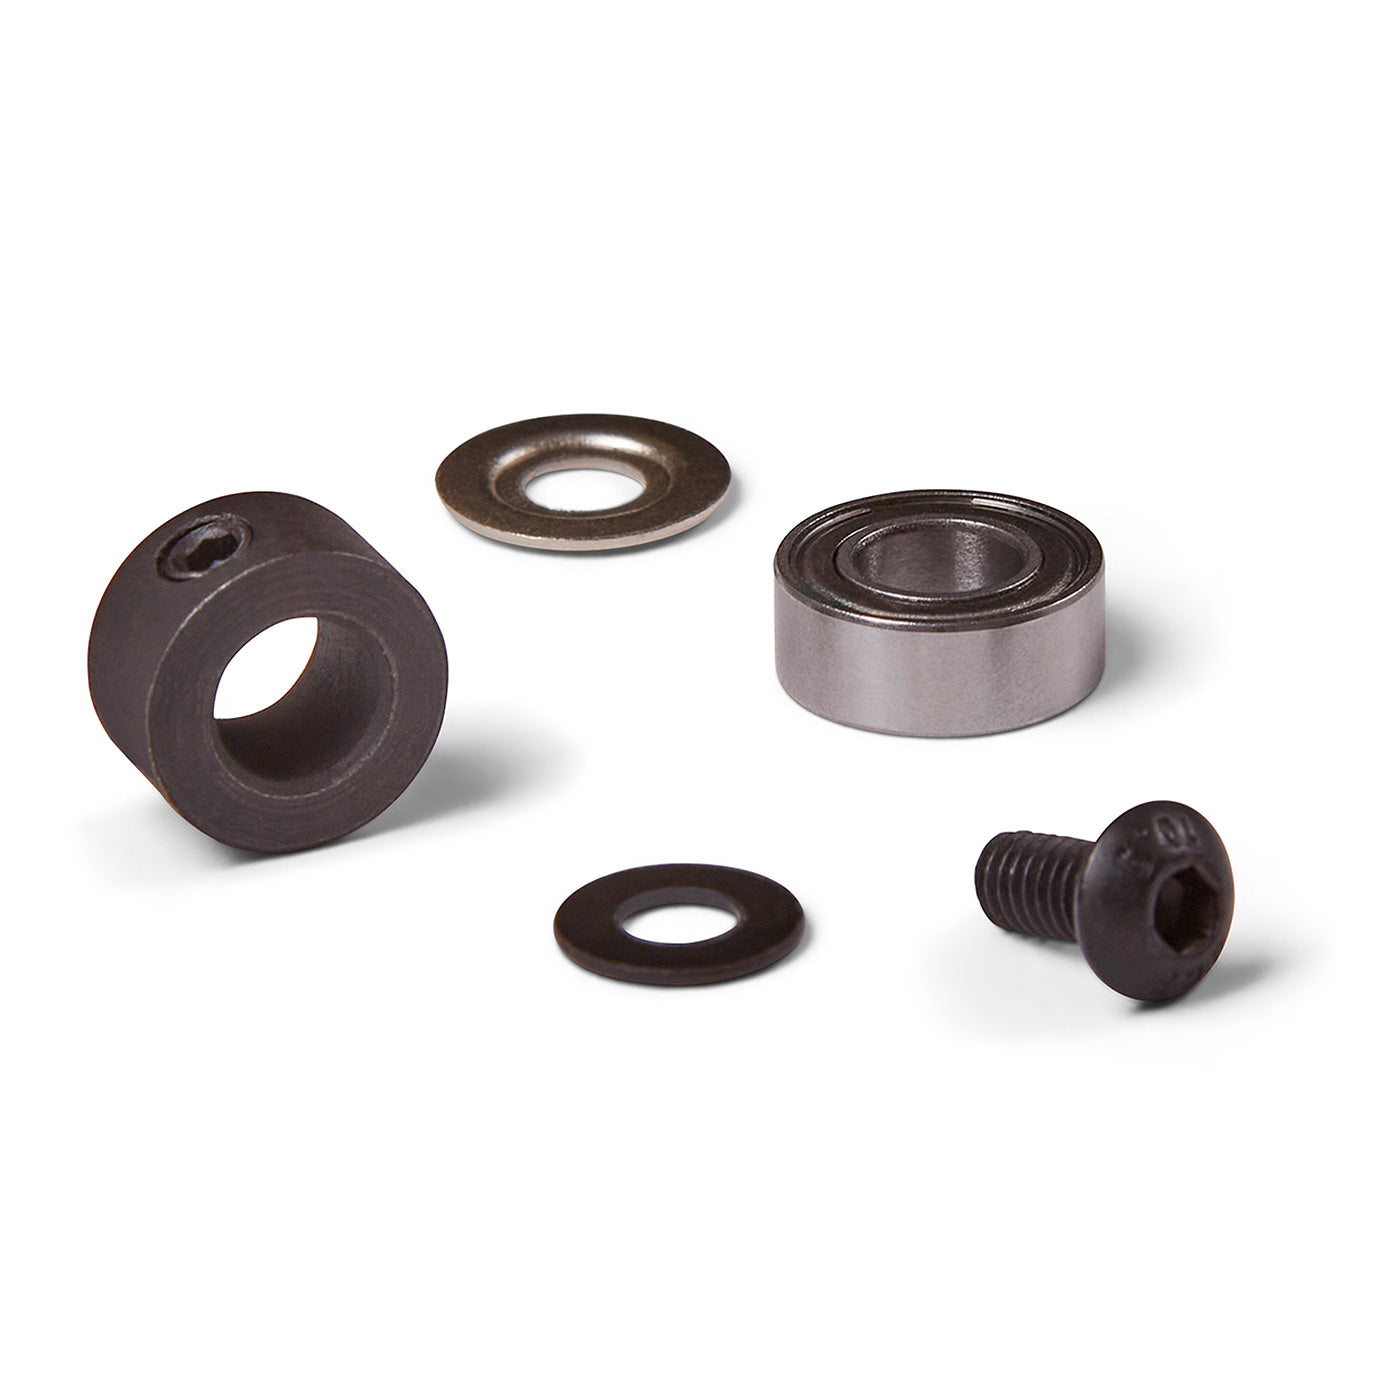 Bearing Kit for R5629, R5630 and R5631  